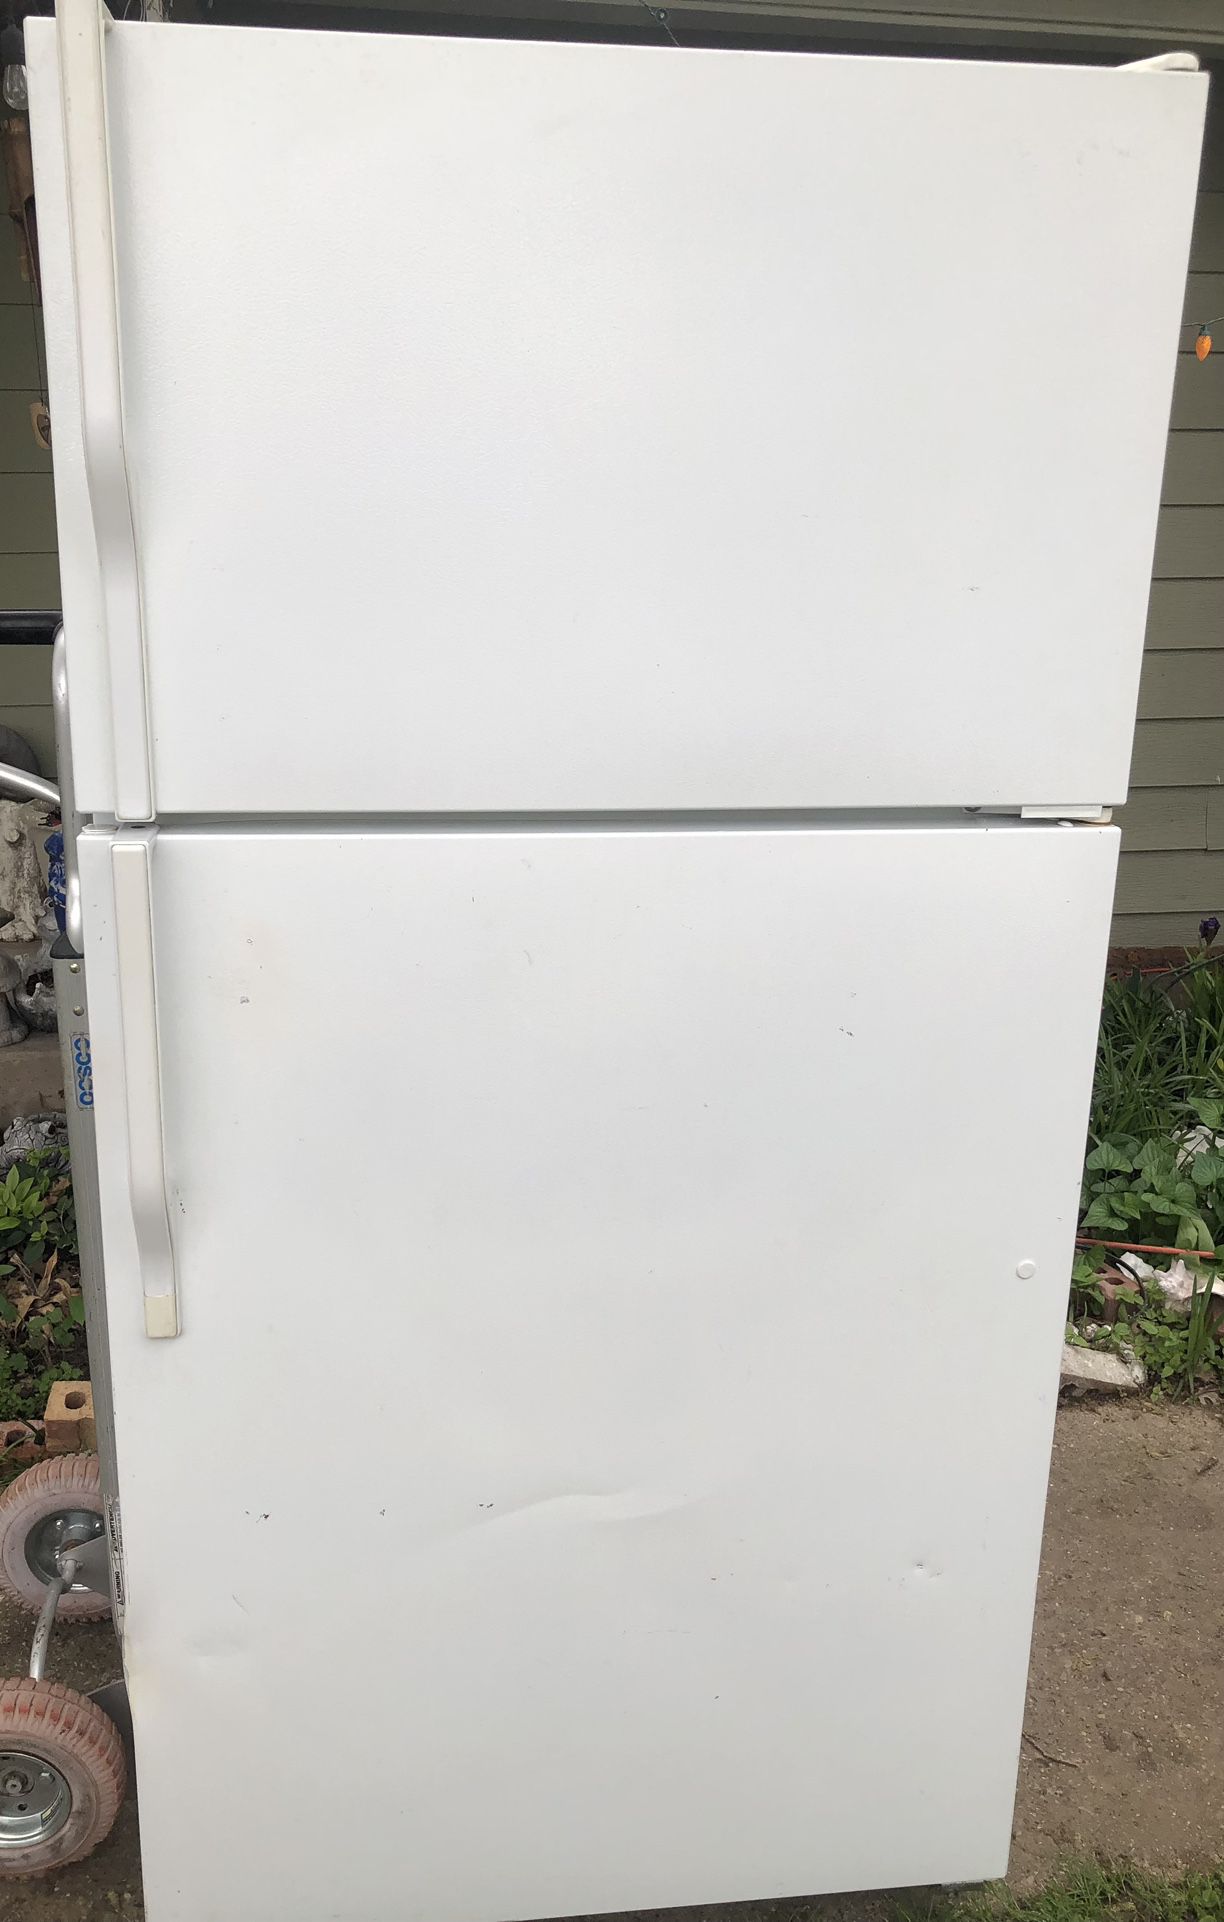 Magic Chef Refrigerator, Works And Cools Great!!! Asking $200 